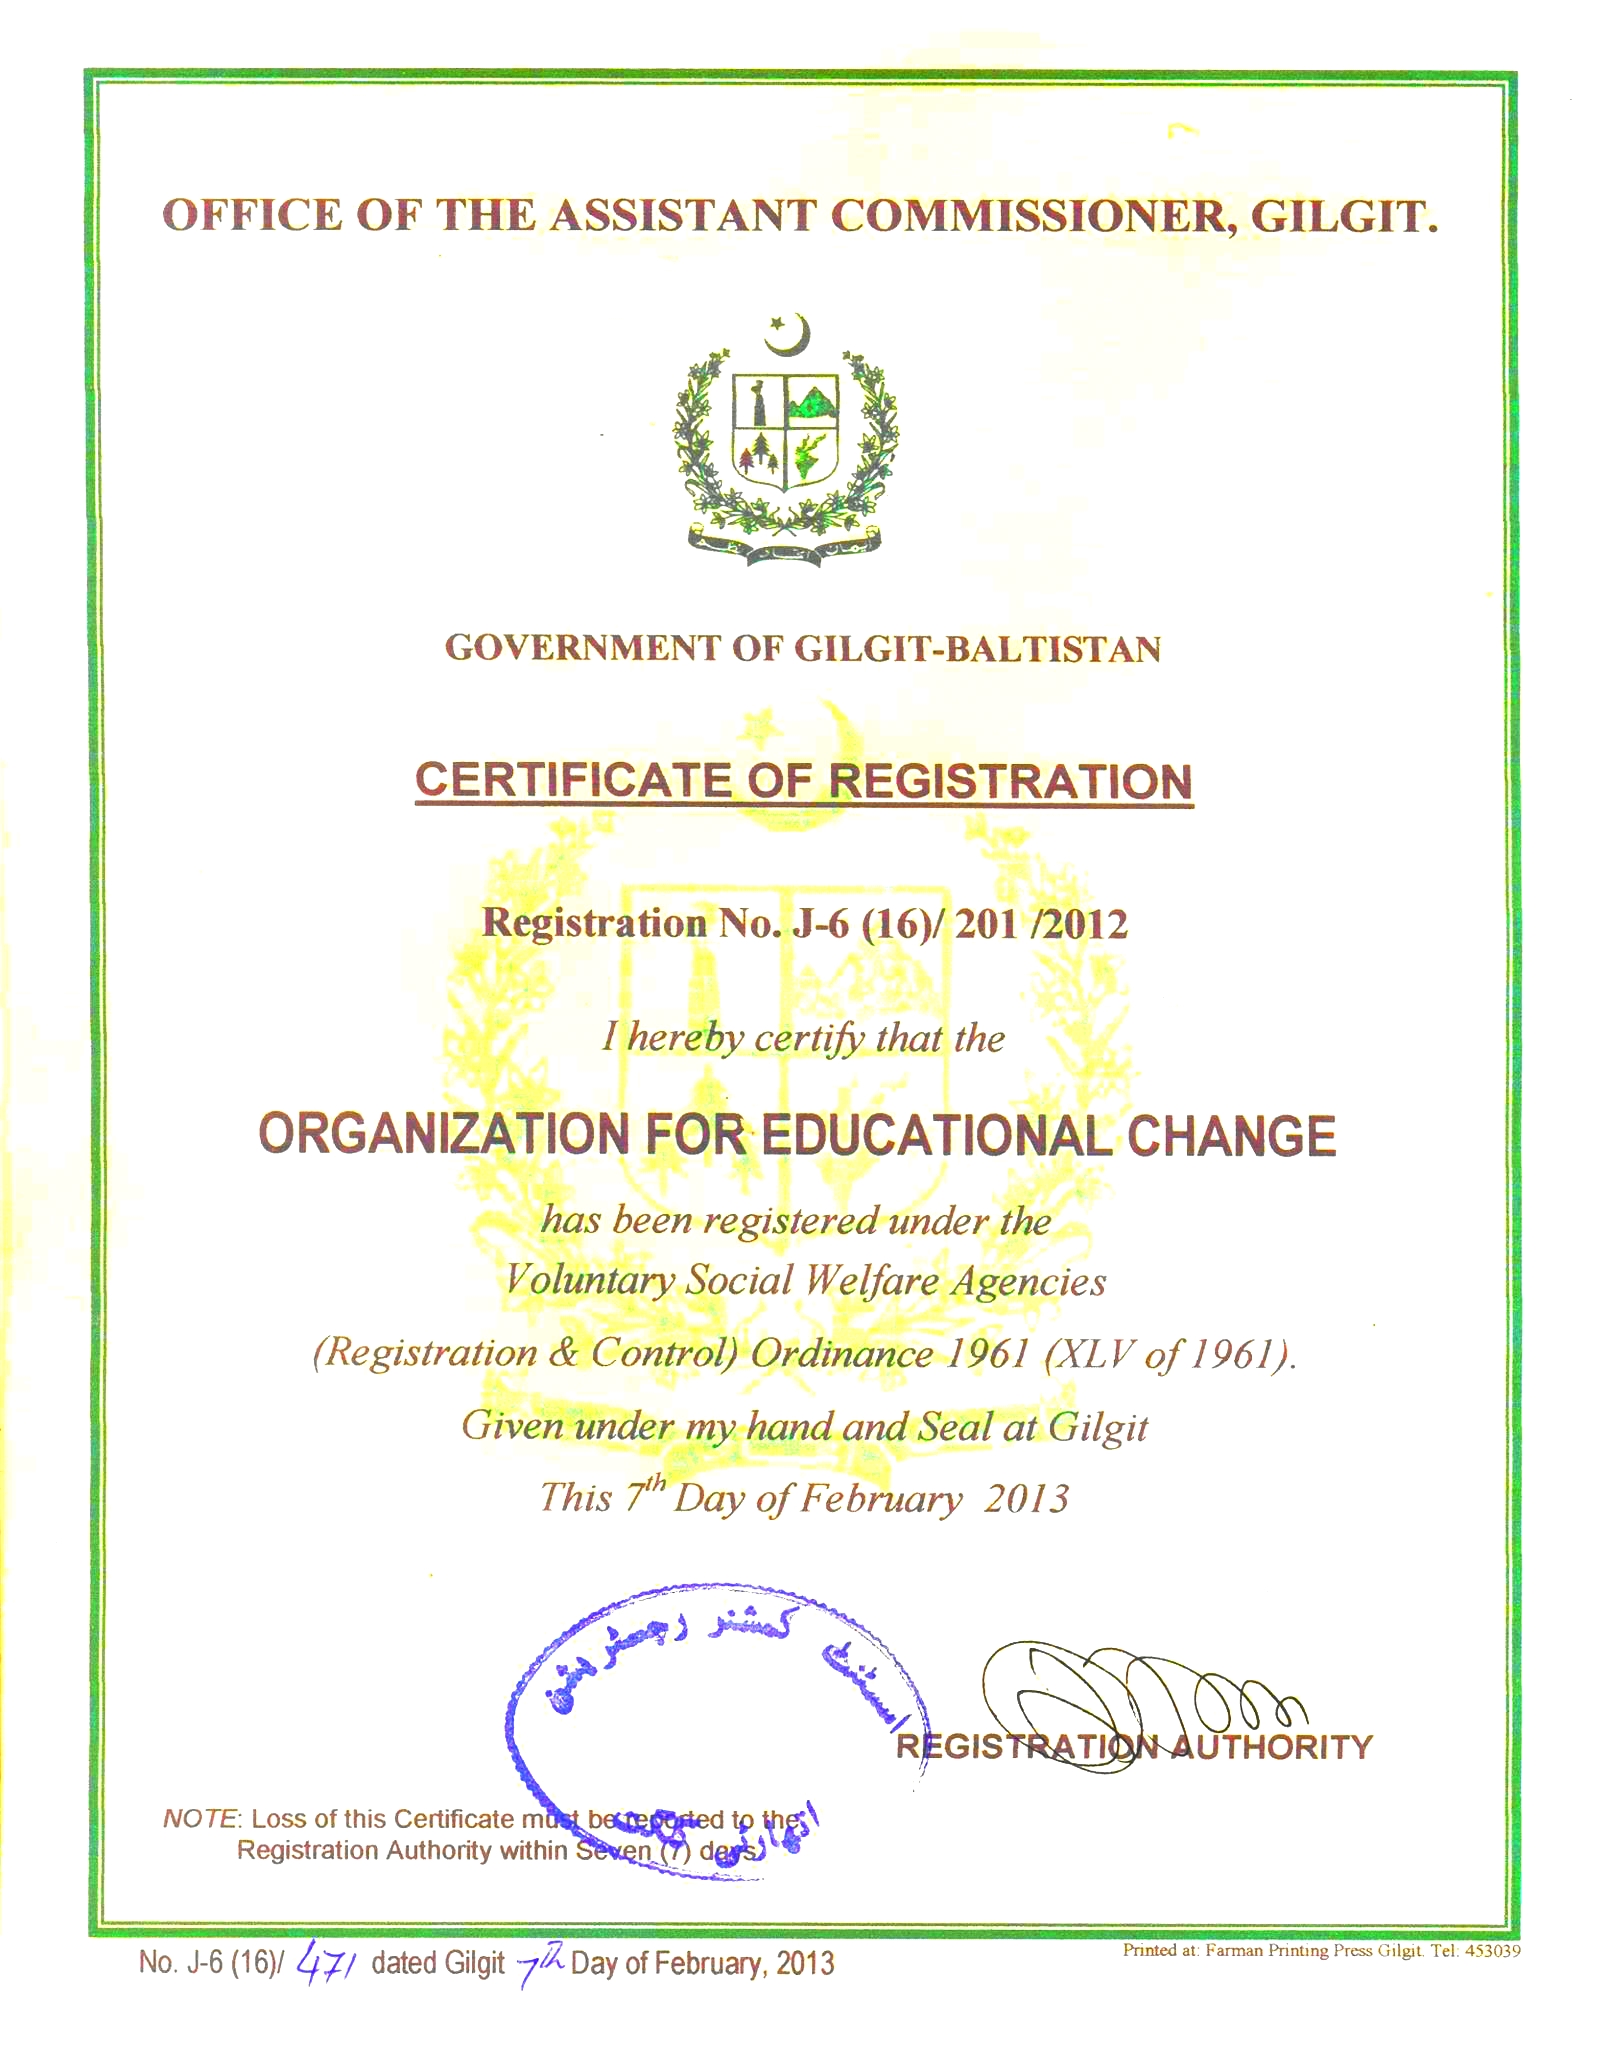 OEC gets registered with Government of Gilgit-Baltistan